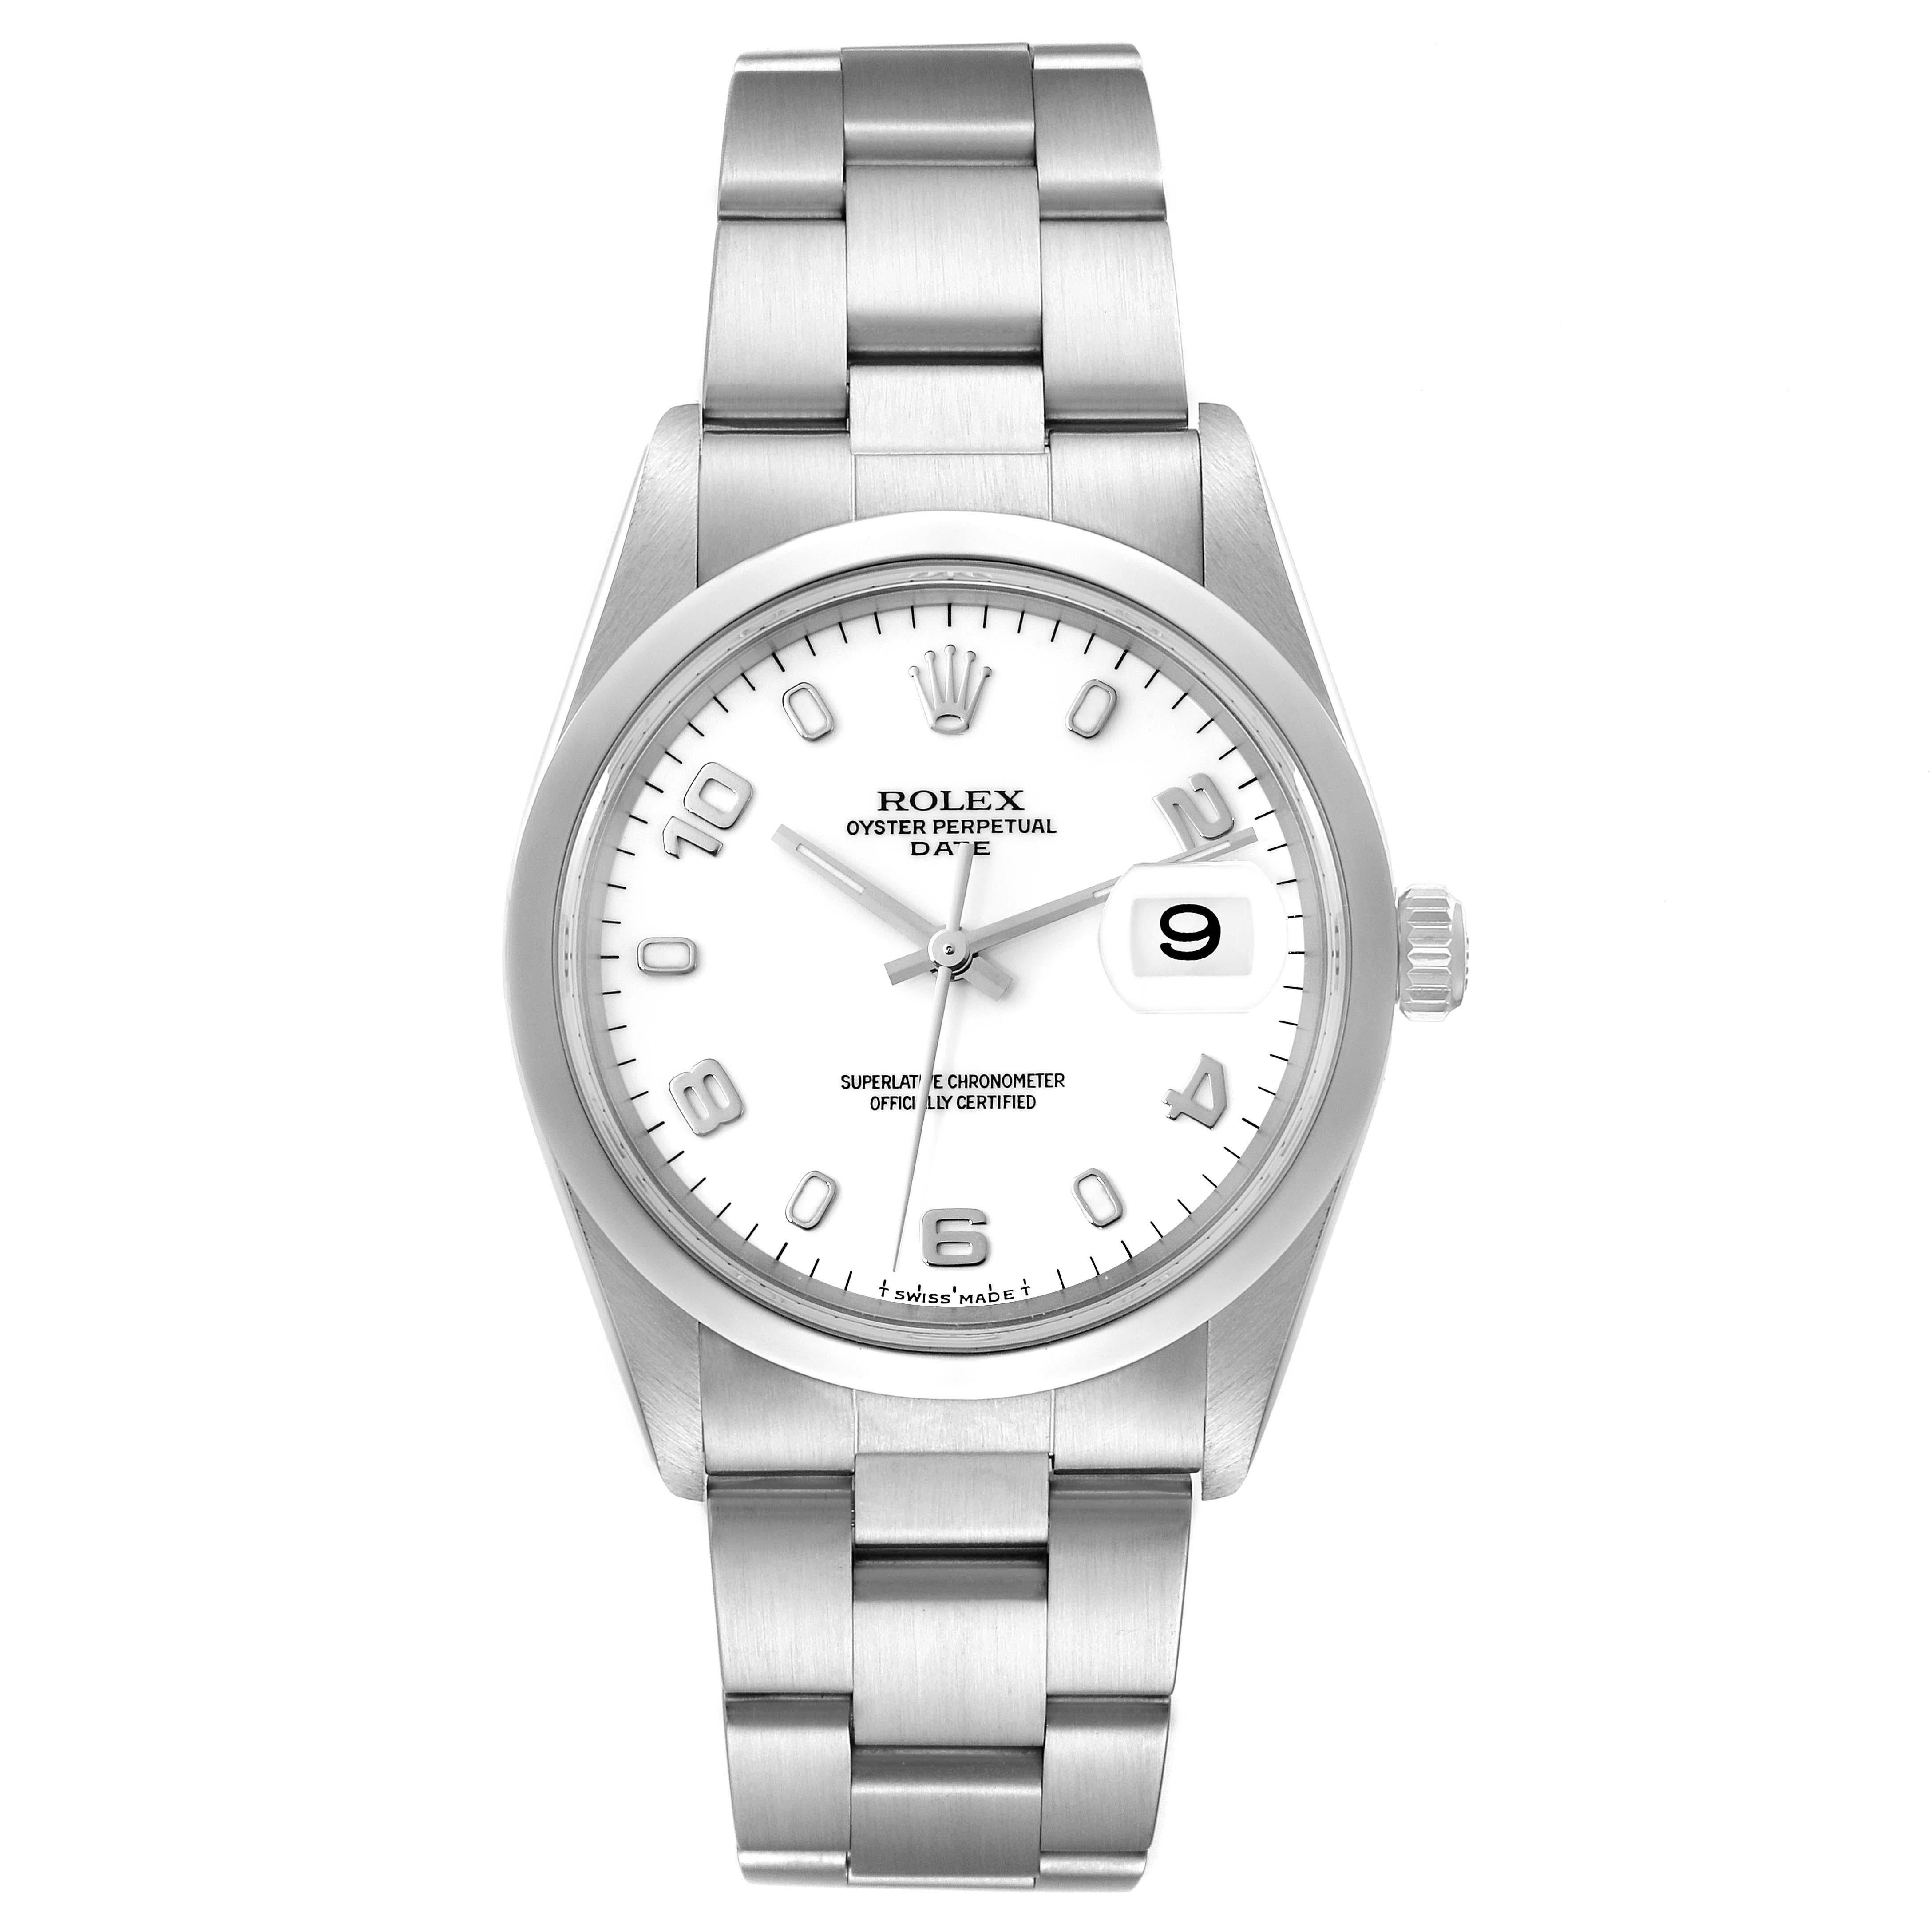 Rolex Date White Dial Oyster Bracelet Steel Mens Watch 15200. Officially certified chronometer automatic self-winding movement. Stainless steel oyster case 34.0 mm in diameter. Rolex logo on the crown. Stainless steel smooth bezel. Scratch resistant